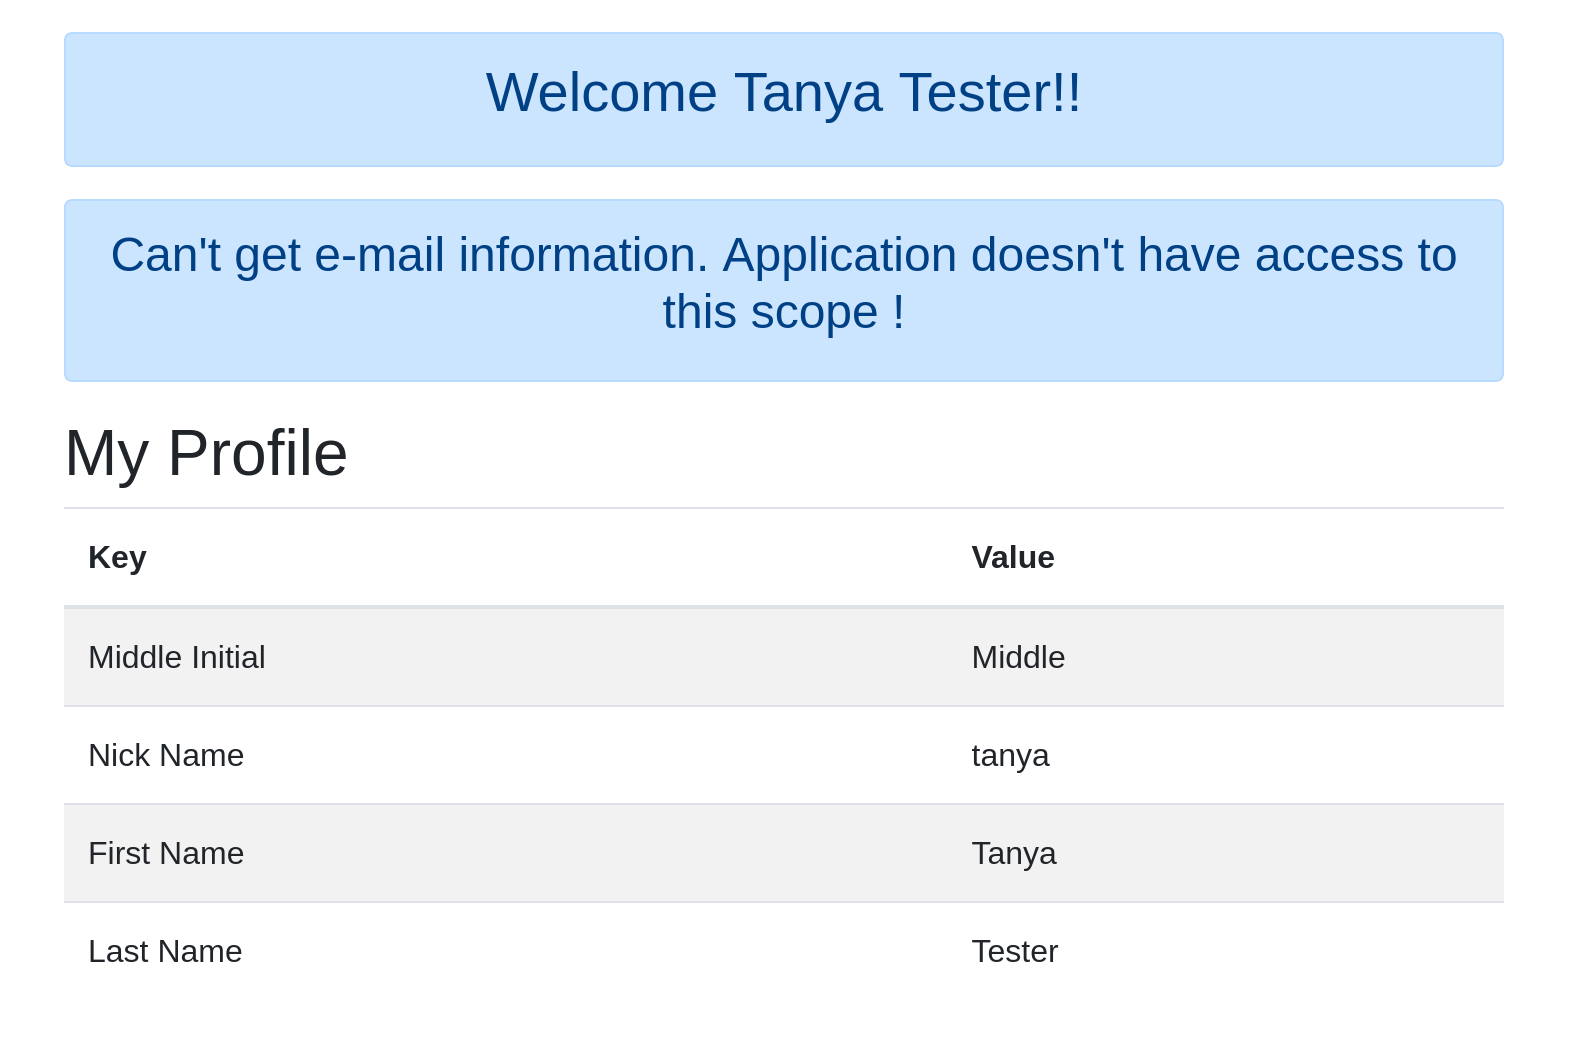 Screen shot, Tanya Tester profile without email scope